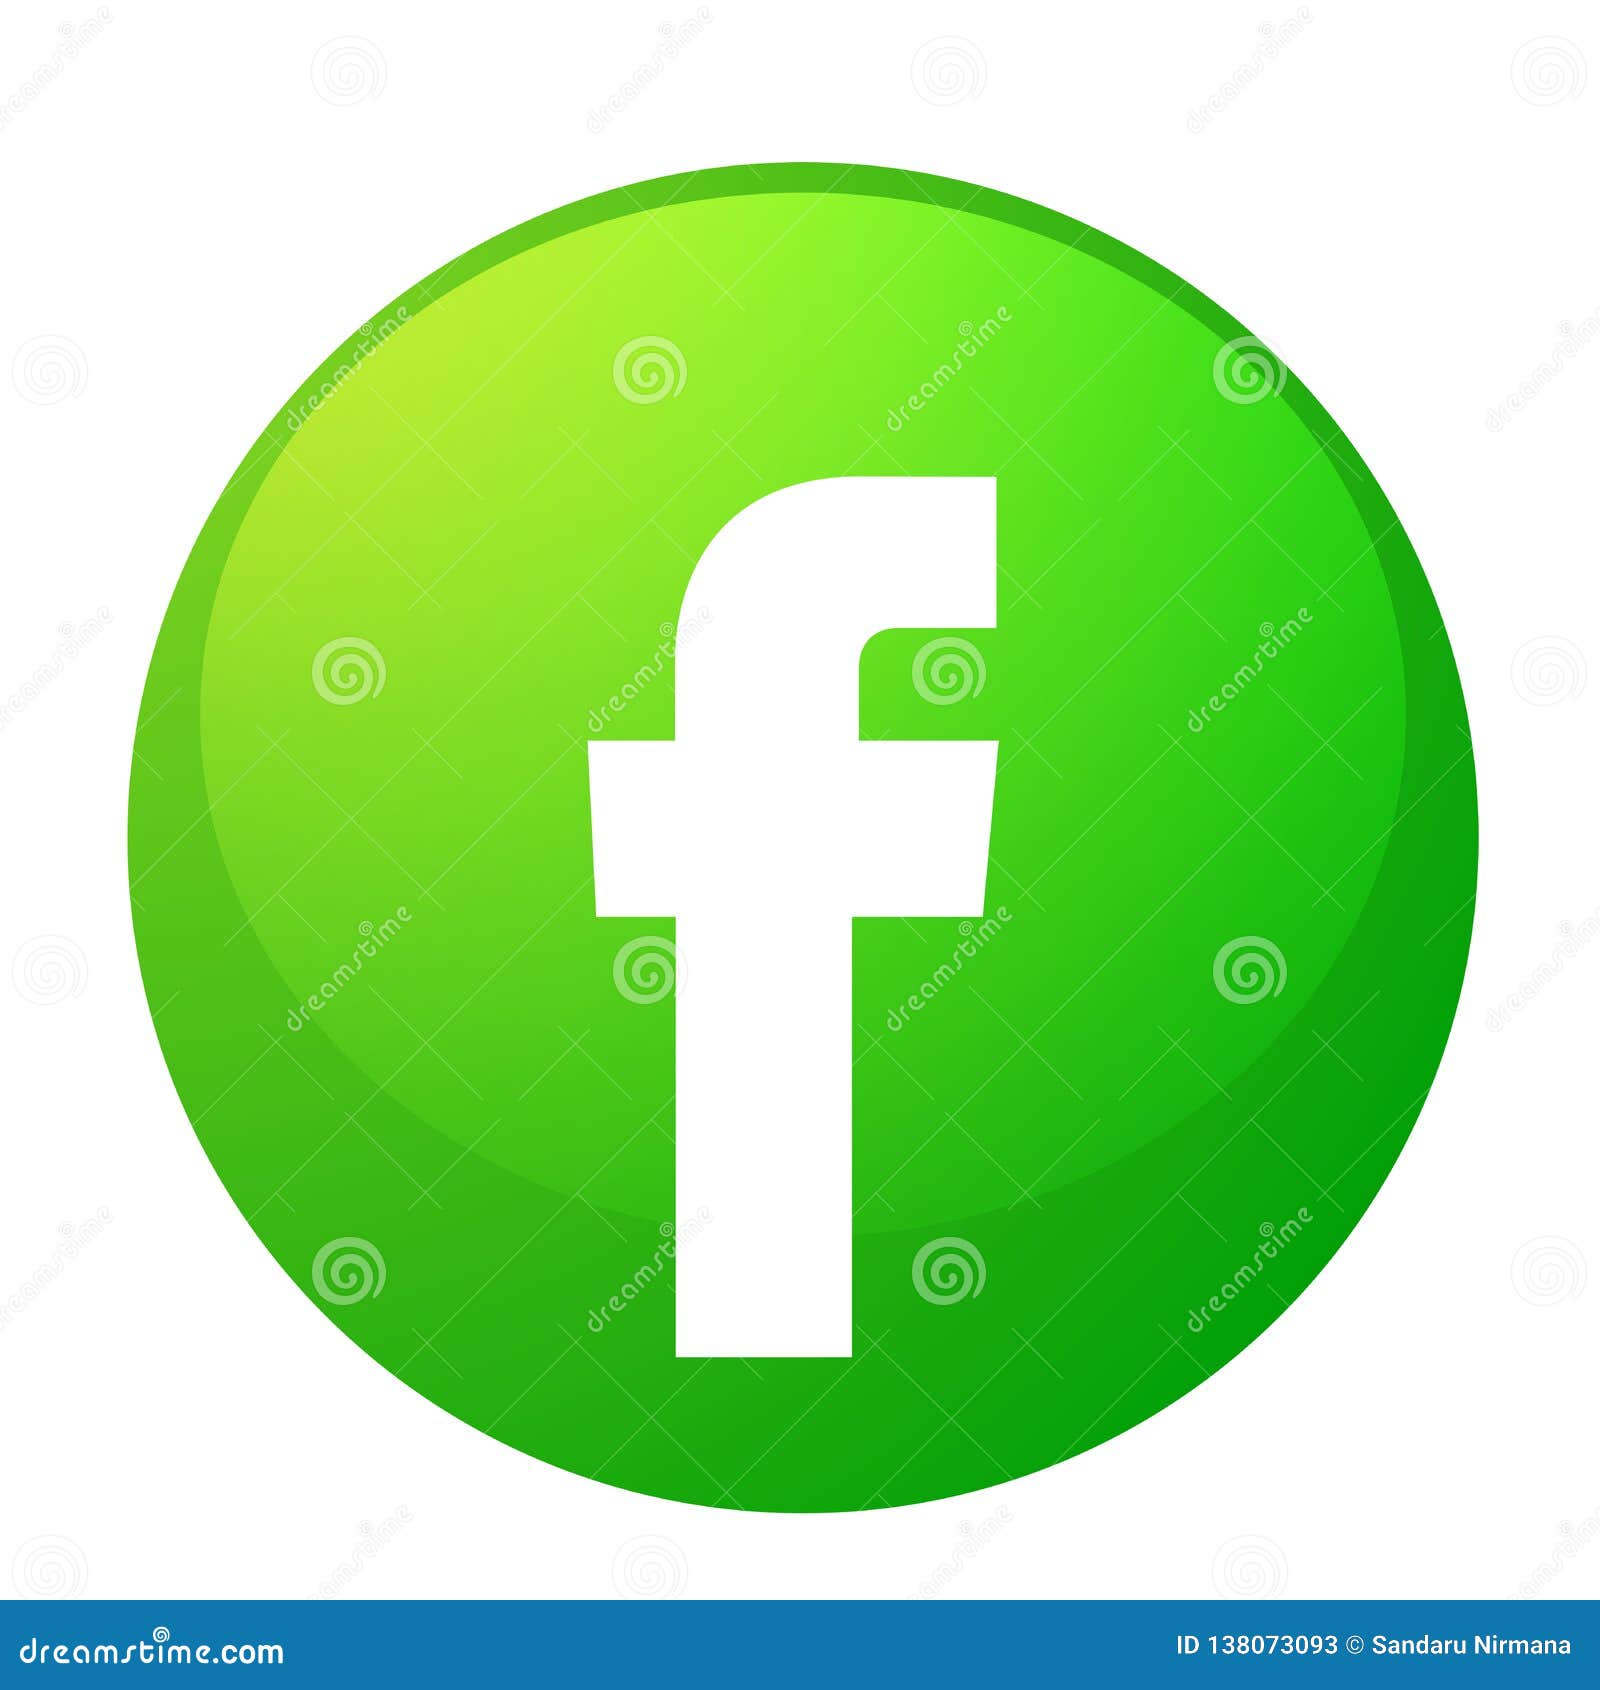 Facebook Logo Icon Vector in Green Illustrations on White Background  Editorial Stock Photo - Illustration of buttons, illustrations: 138073093